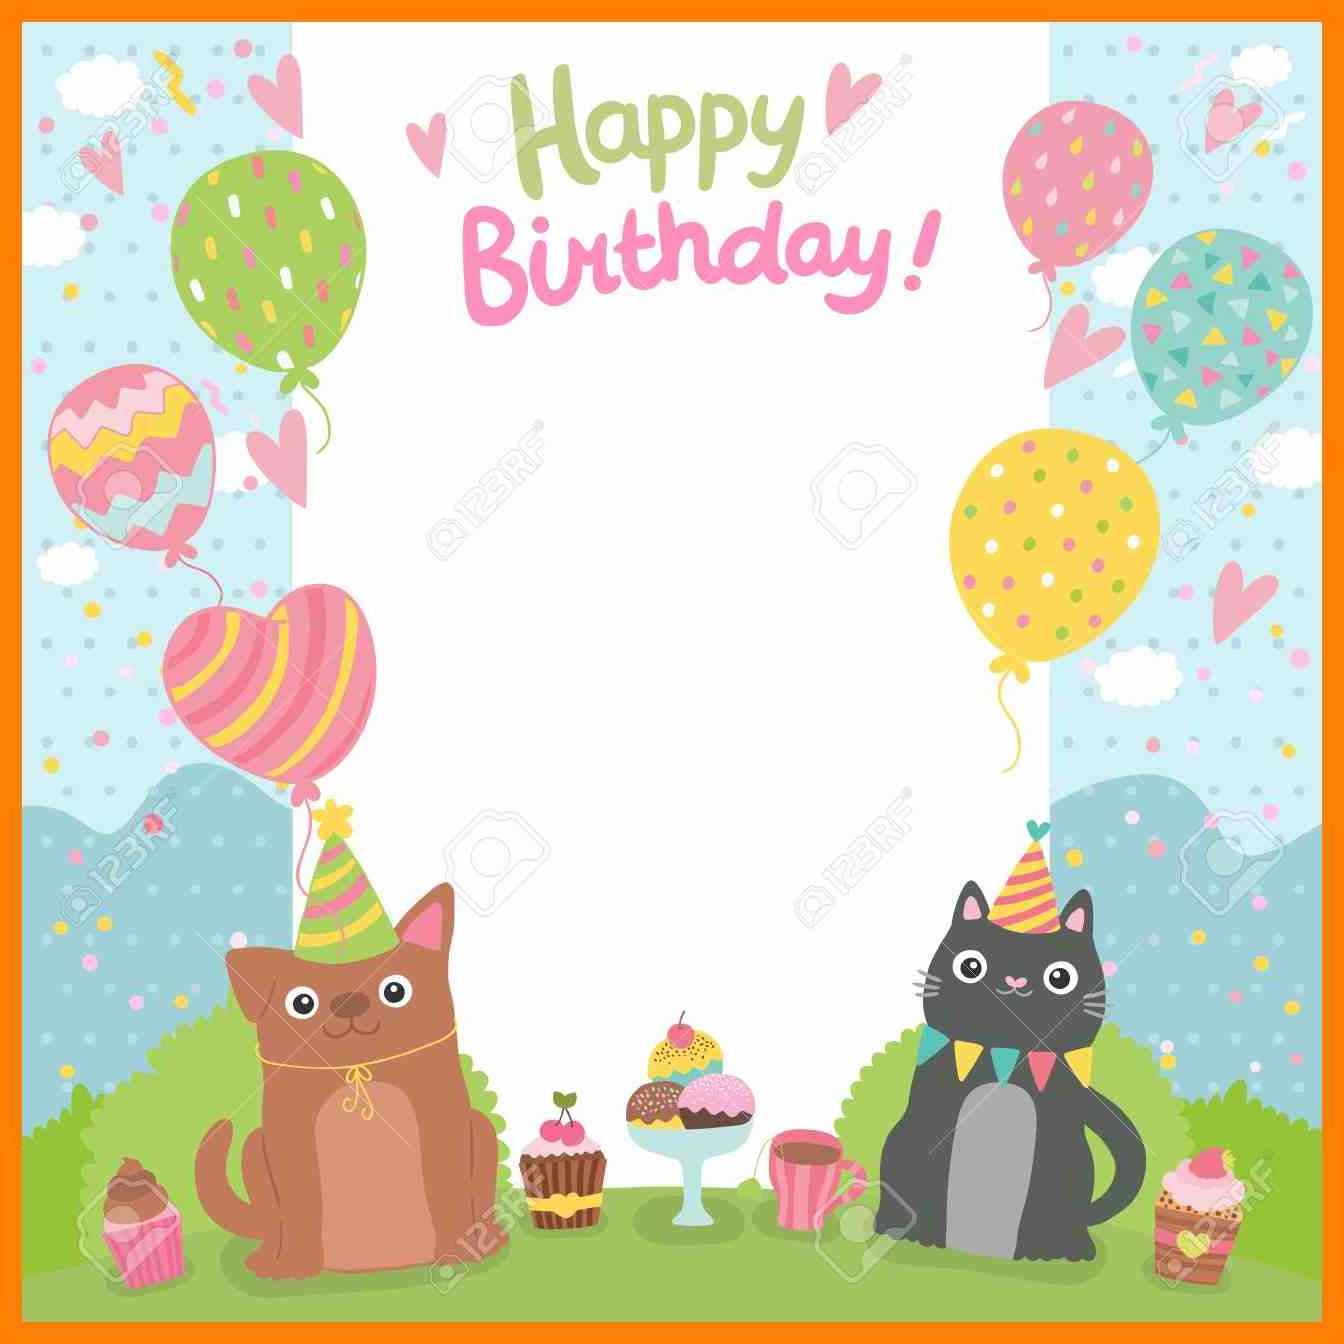 82 Creating Birthday Card Template In Powerpoint In Photoshop By Birthday Card Template In Powerpoint Cards Design Templates